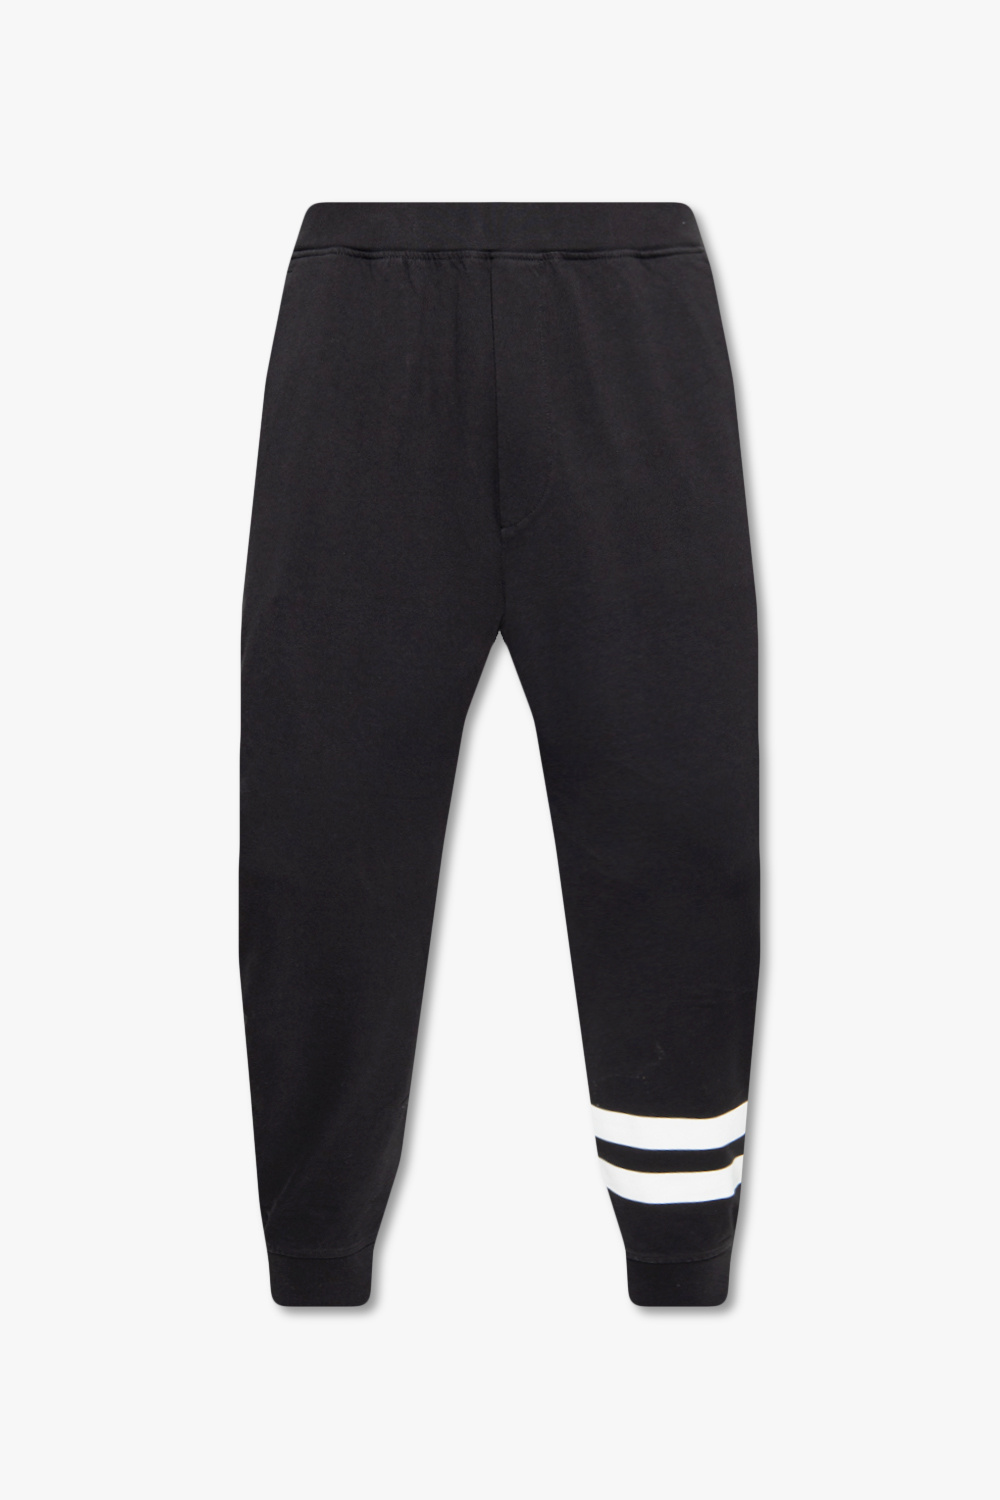 Dsquared2 Sweatpants with dropped crotch